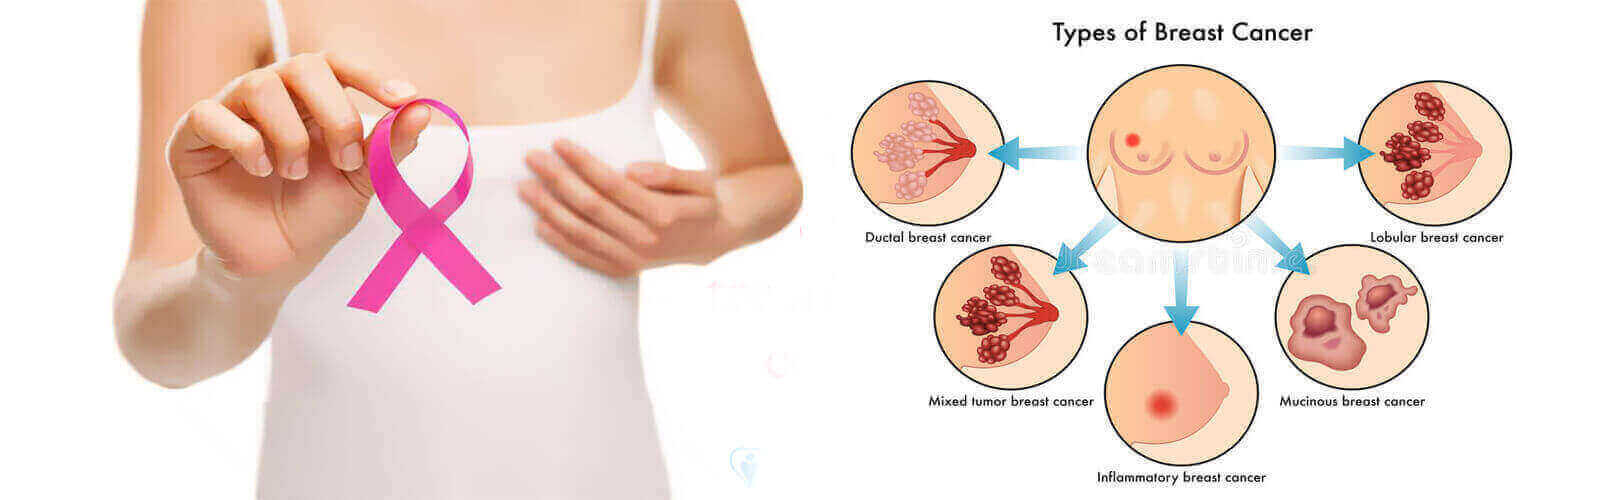 Breast Cancer Treatment in Oman